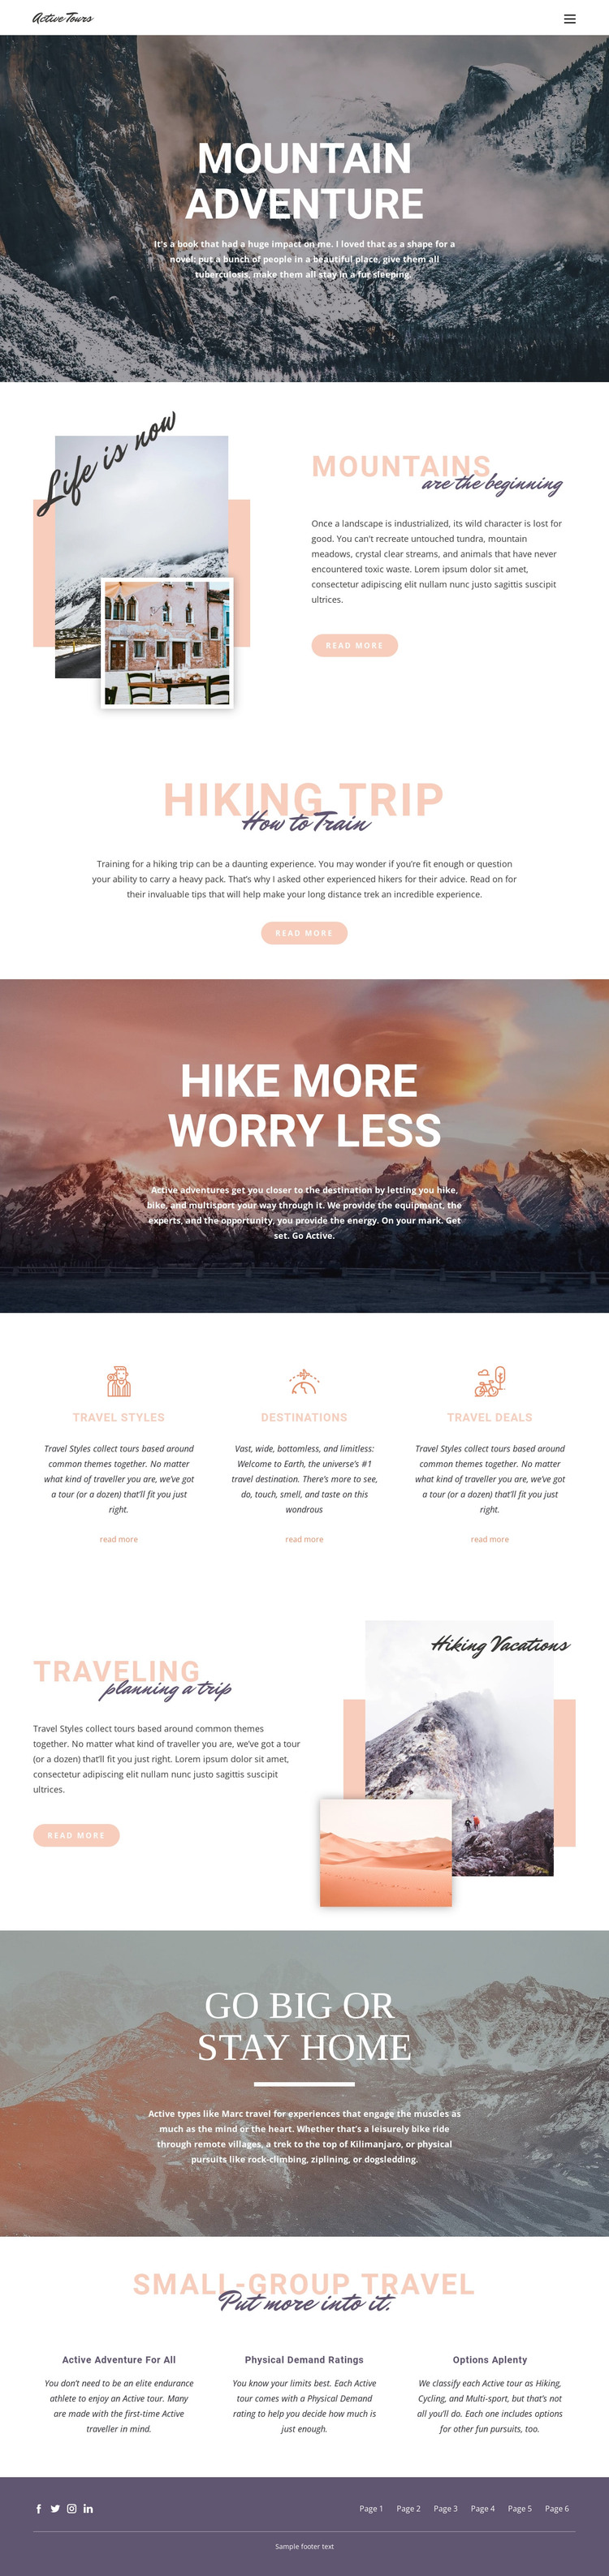 Guided backpacking trips Web Design